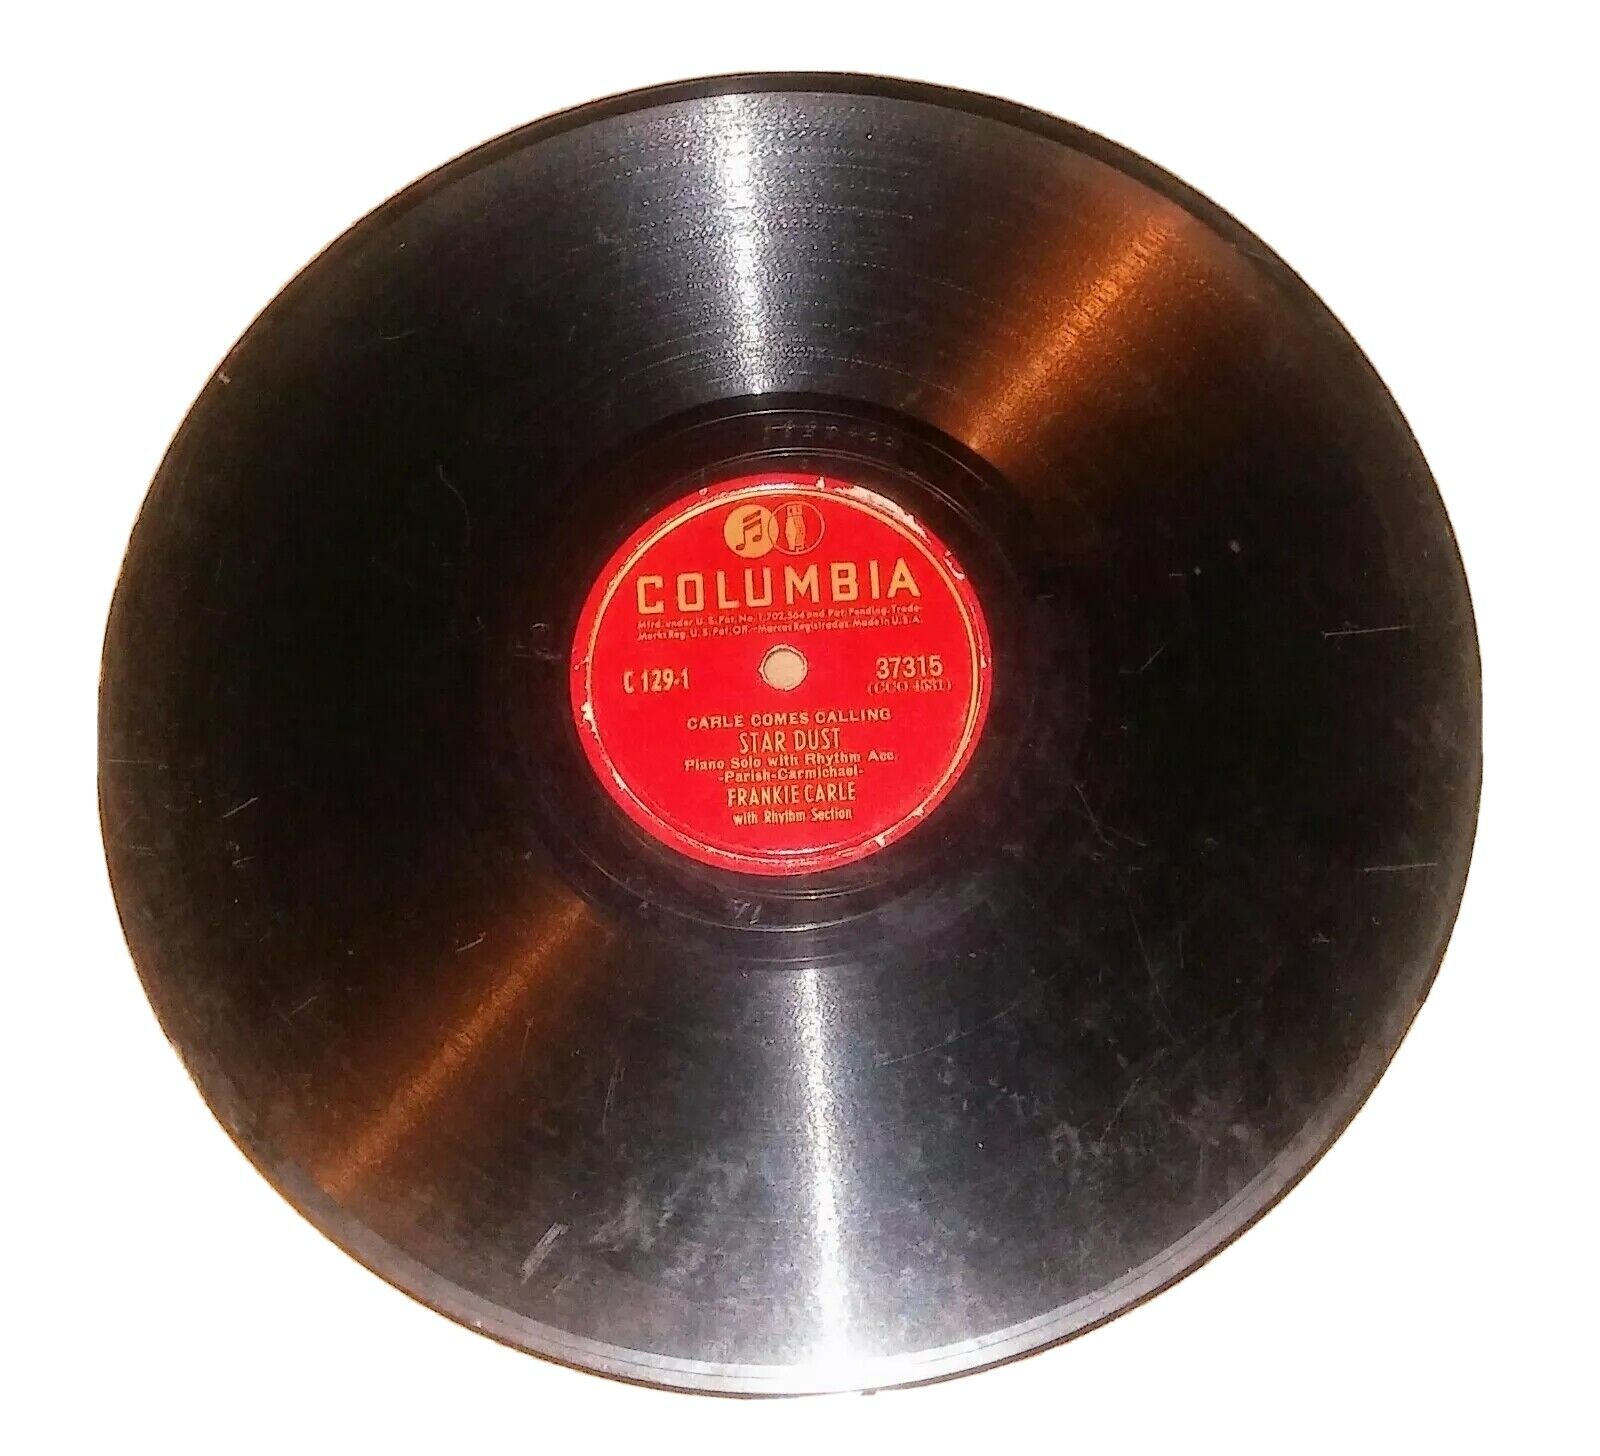 Carle Comes Calling Star Dust. 78 RPM Record By Frankie Carle. Columbia 37315